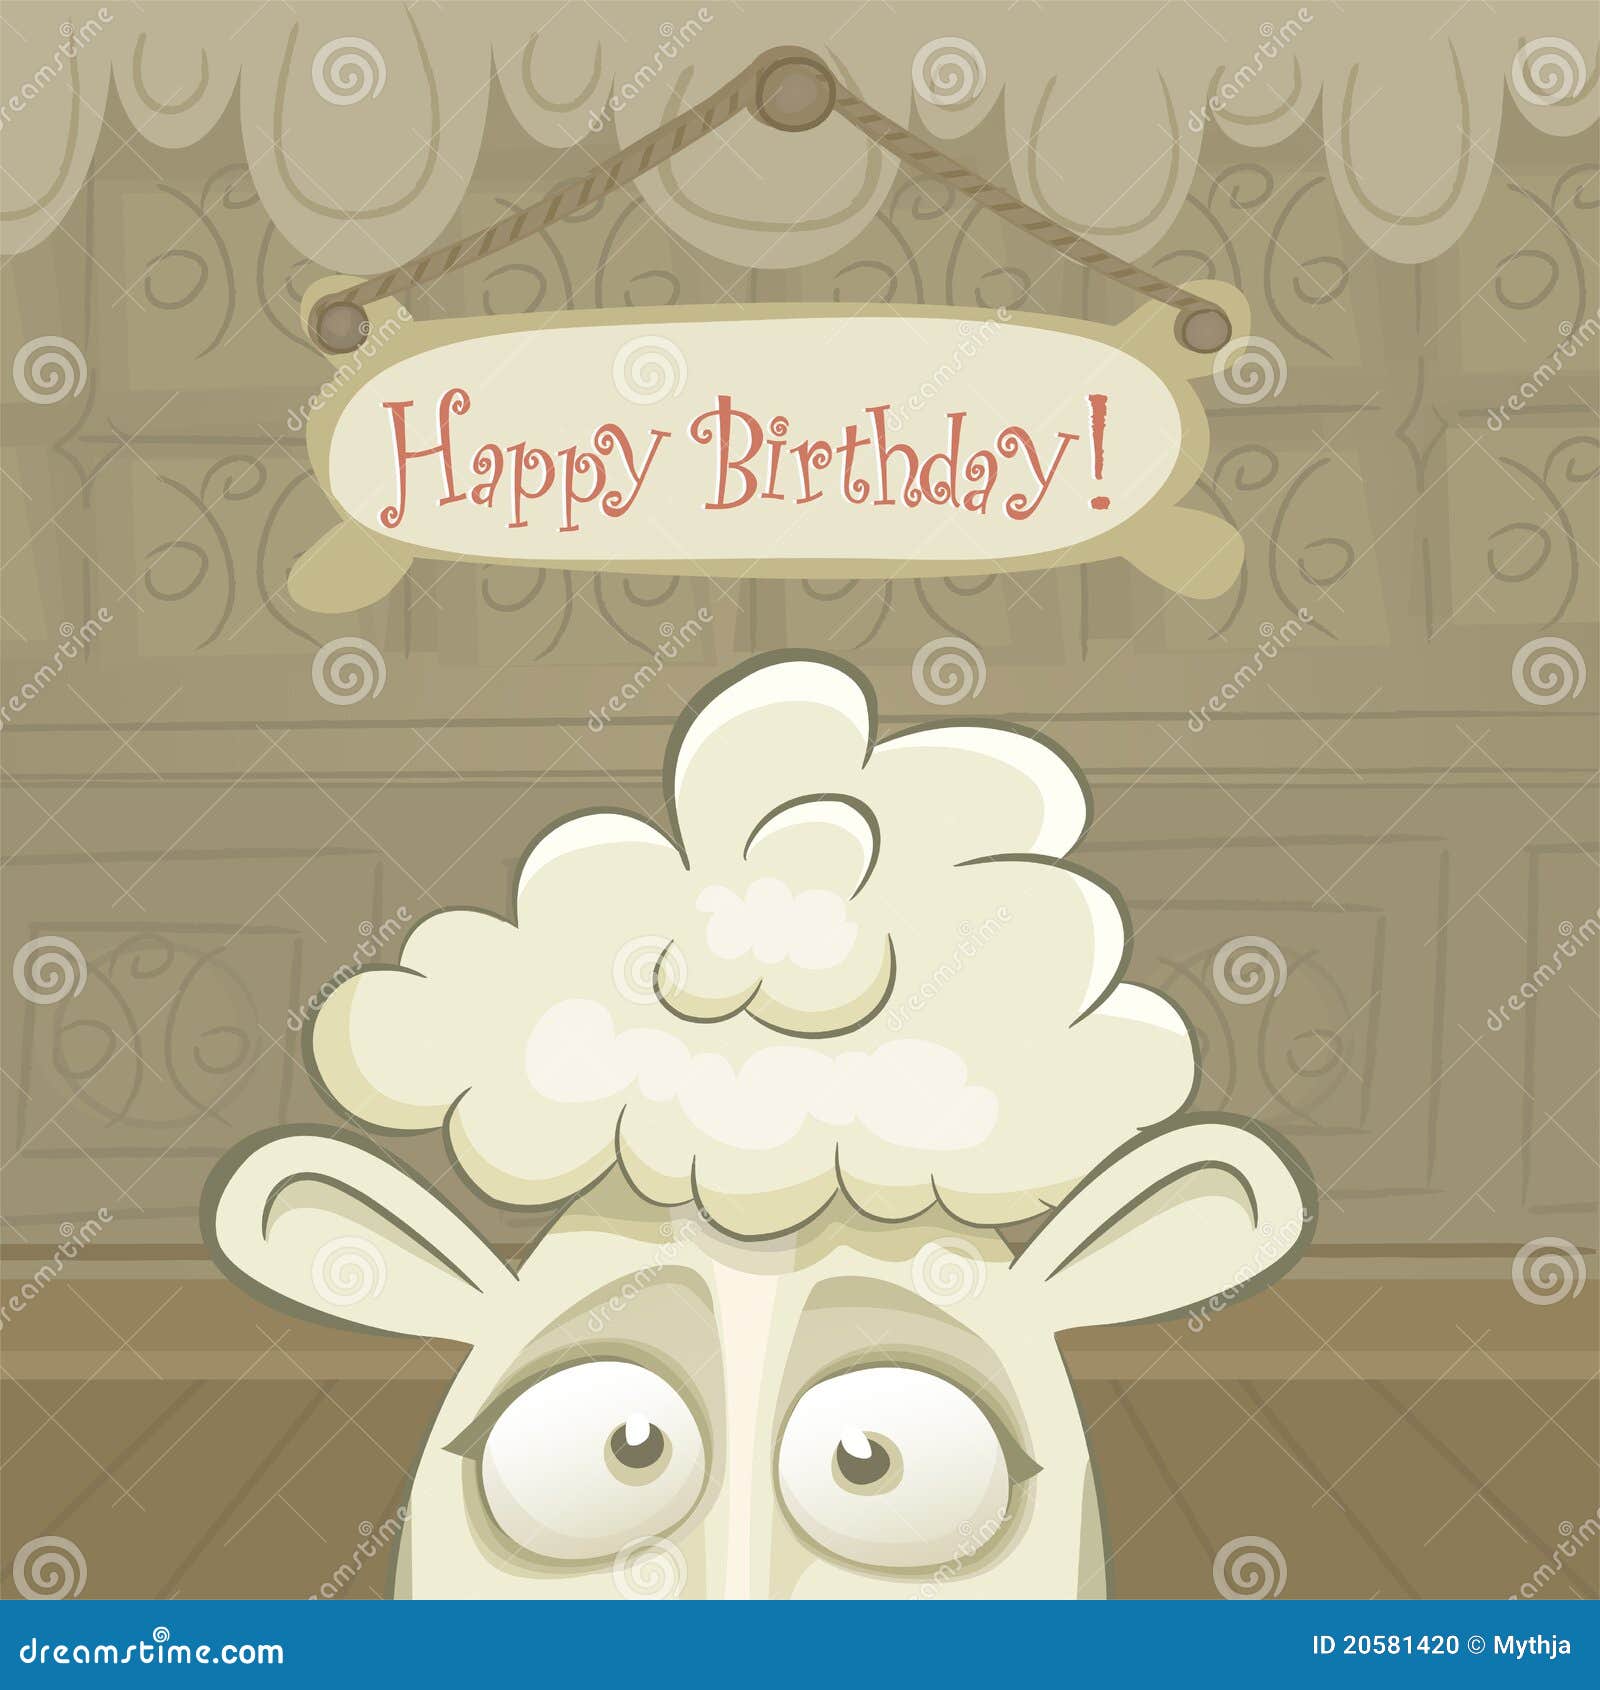 Vector Birthday Card With Funny Sheep Stock Vector - Image 